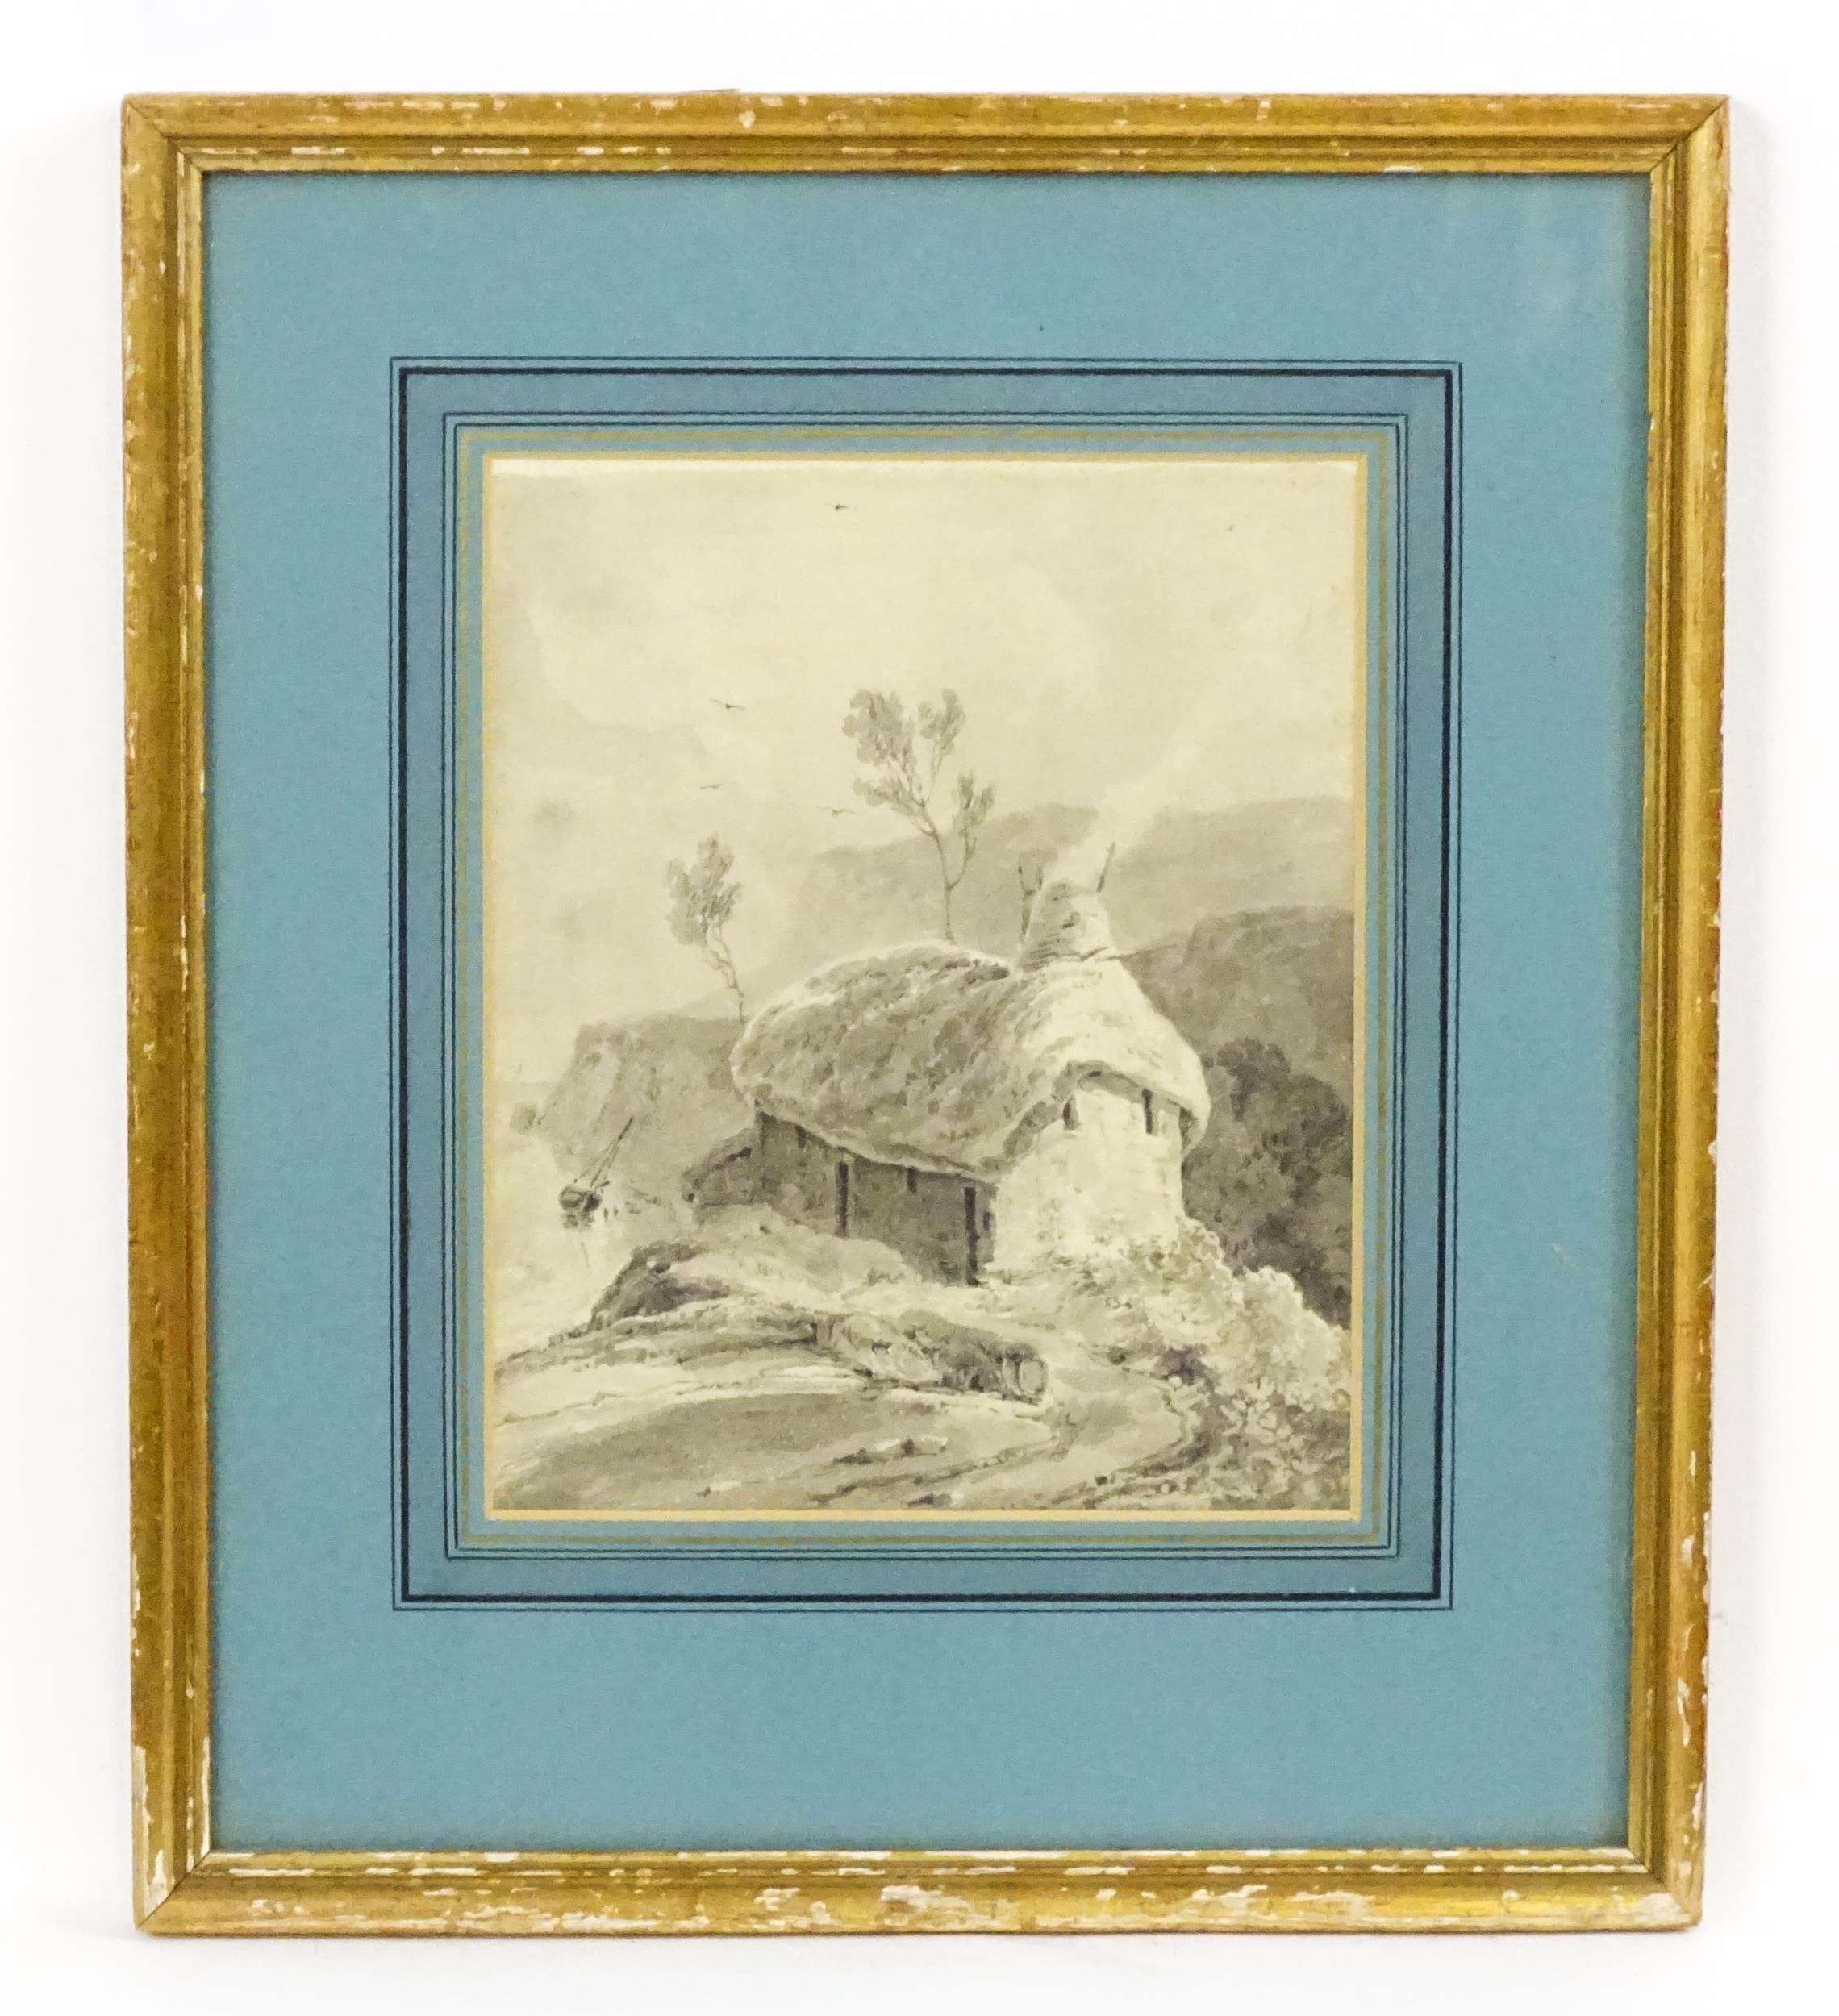 Manner of Paul Sandby Munn, 19th century, Watercolour wash, Undercliff, Isle of Wight, A coastal